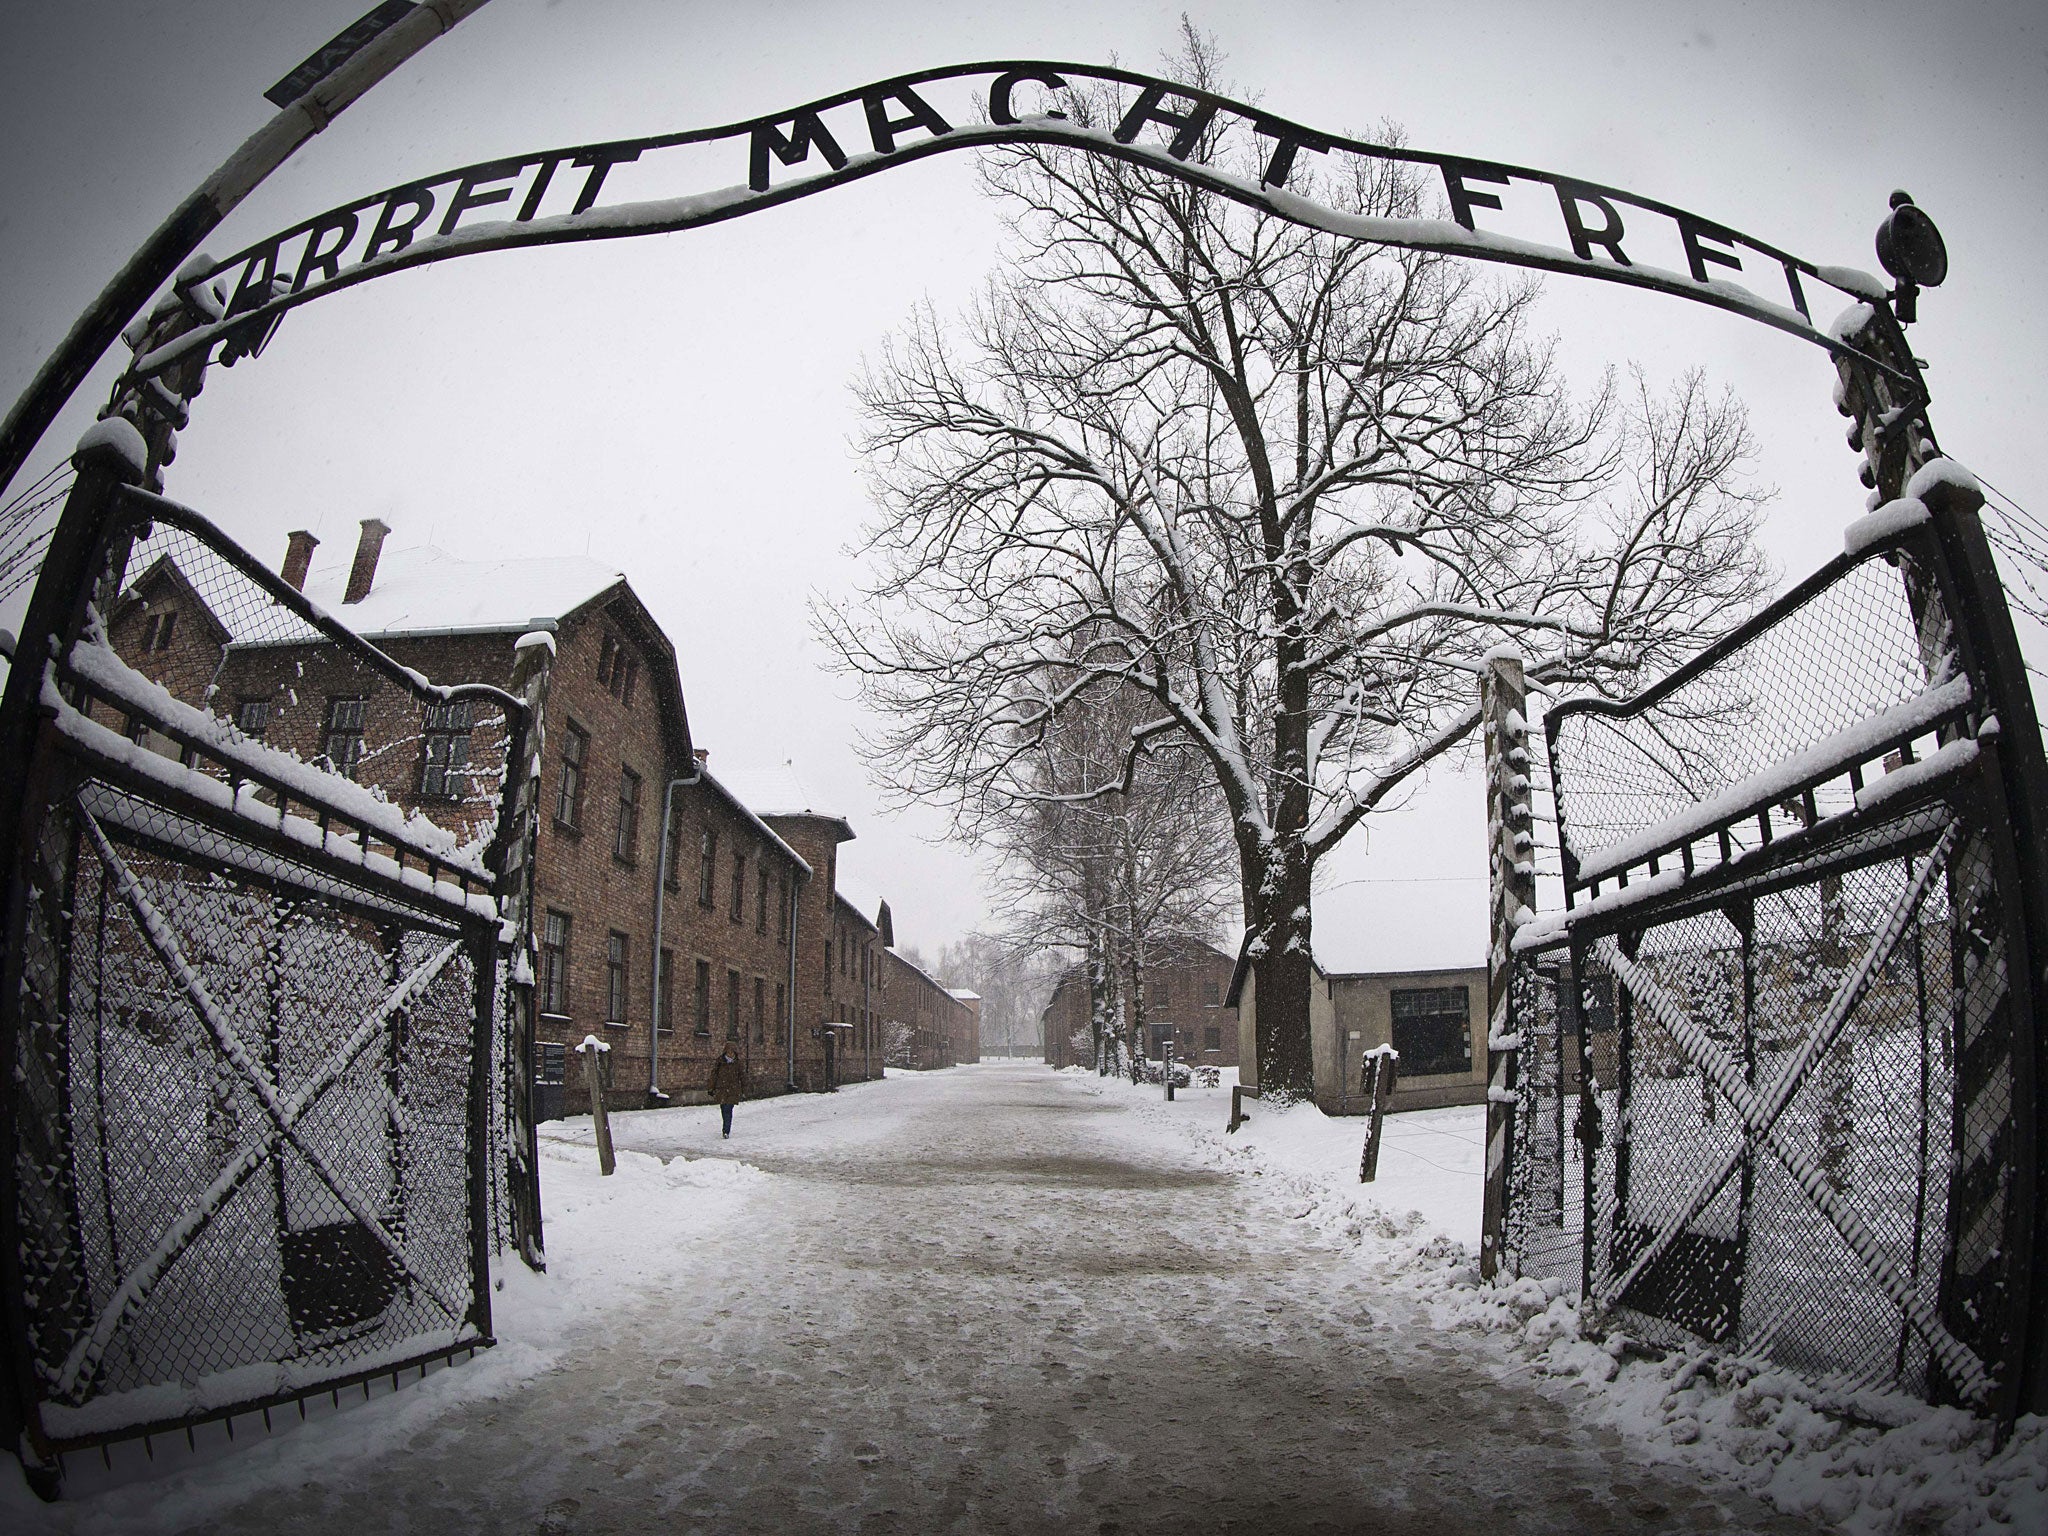 A mausoleum to misery: Auschwitz concentration camp, 2015